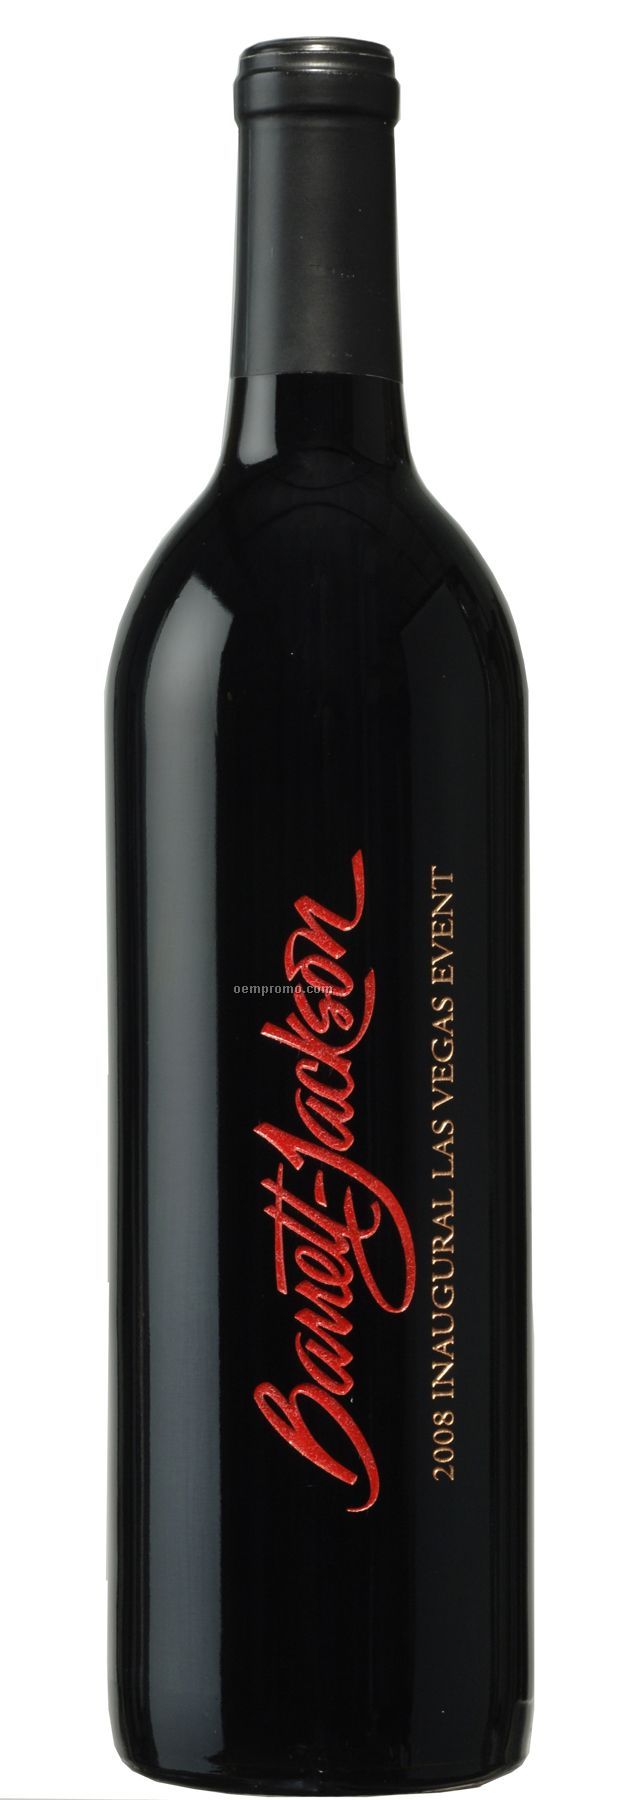 2007 Wv Fusion Red, California Wine (Etched Wine)